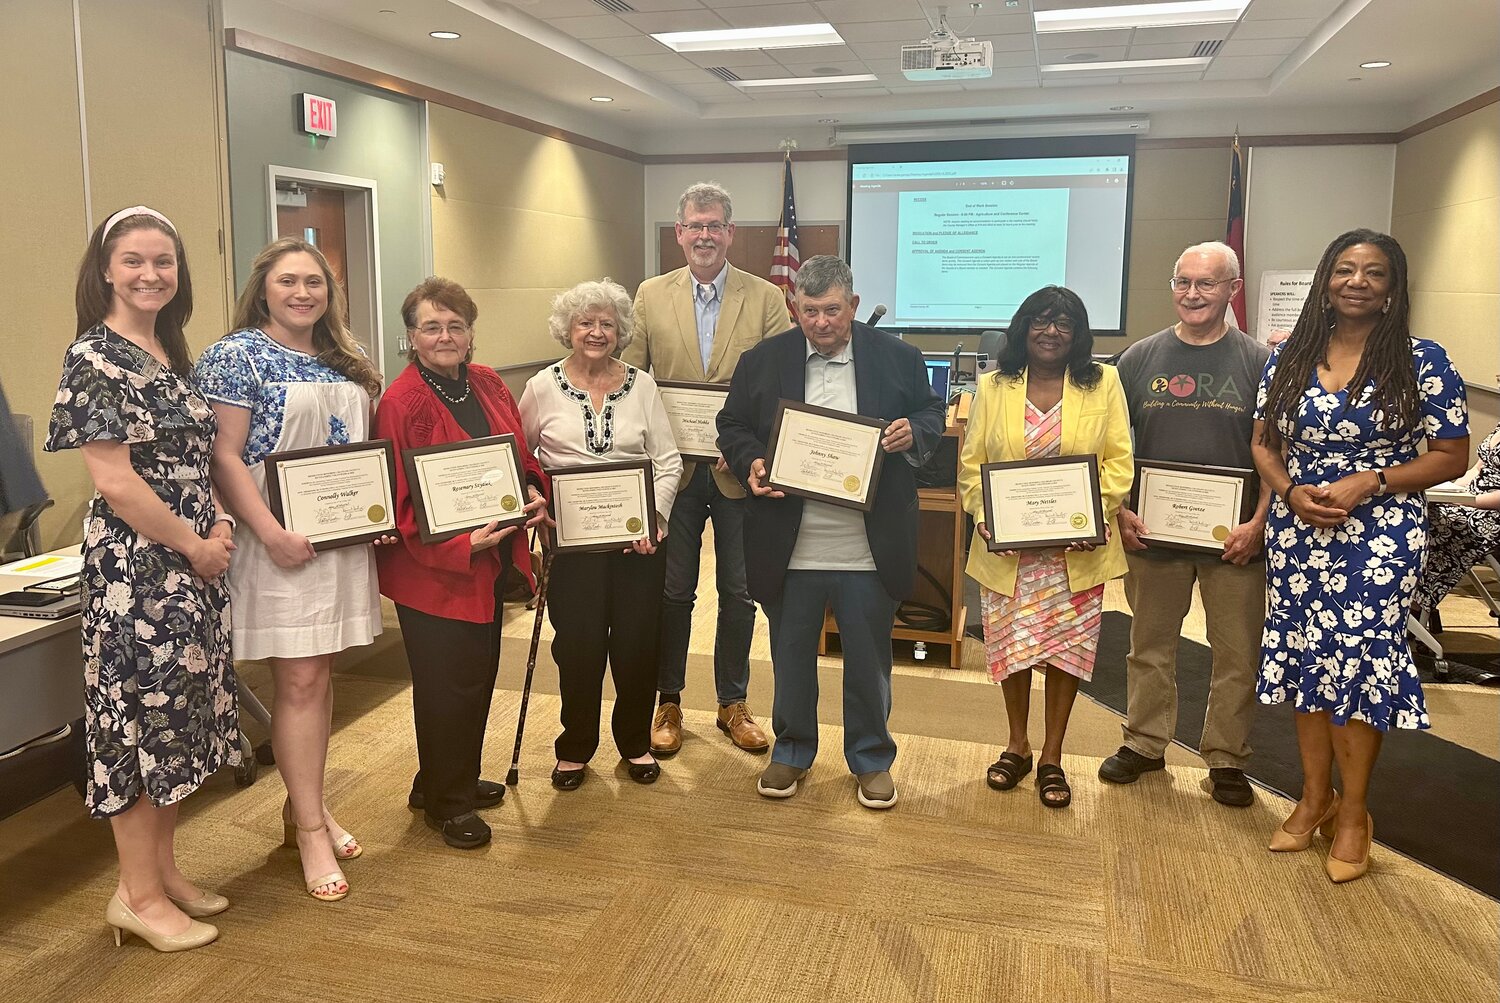 Chatham County volunteers were honored at the May Chatham Commissioners meeting by United Way. From left to right: United Way Executive Director Katie Childs, Connolly Walker, Rosemary Szydlek, Marylou Mackintosh, Michael Hobbs, Johnny Shaw, Mary Nettles, Bob Goetze and Chatham County Commissioner Chair Karen Howard.